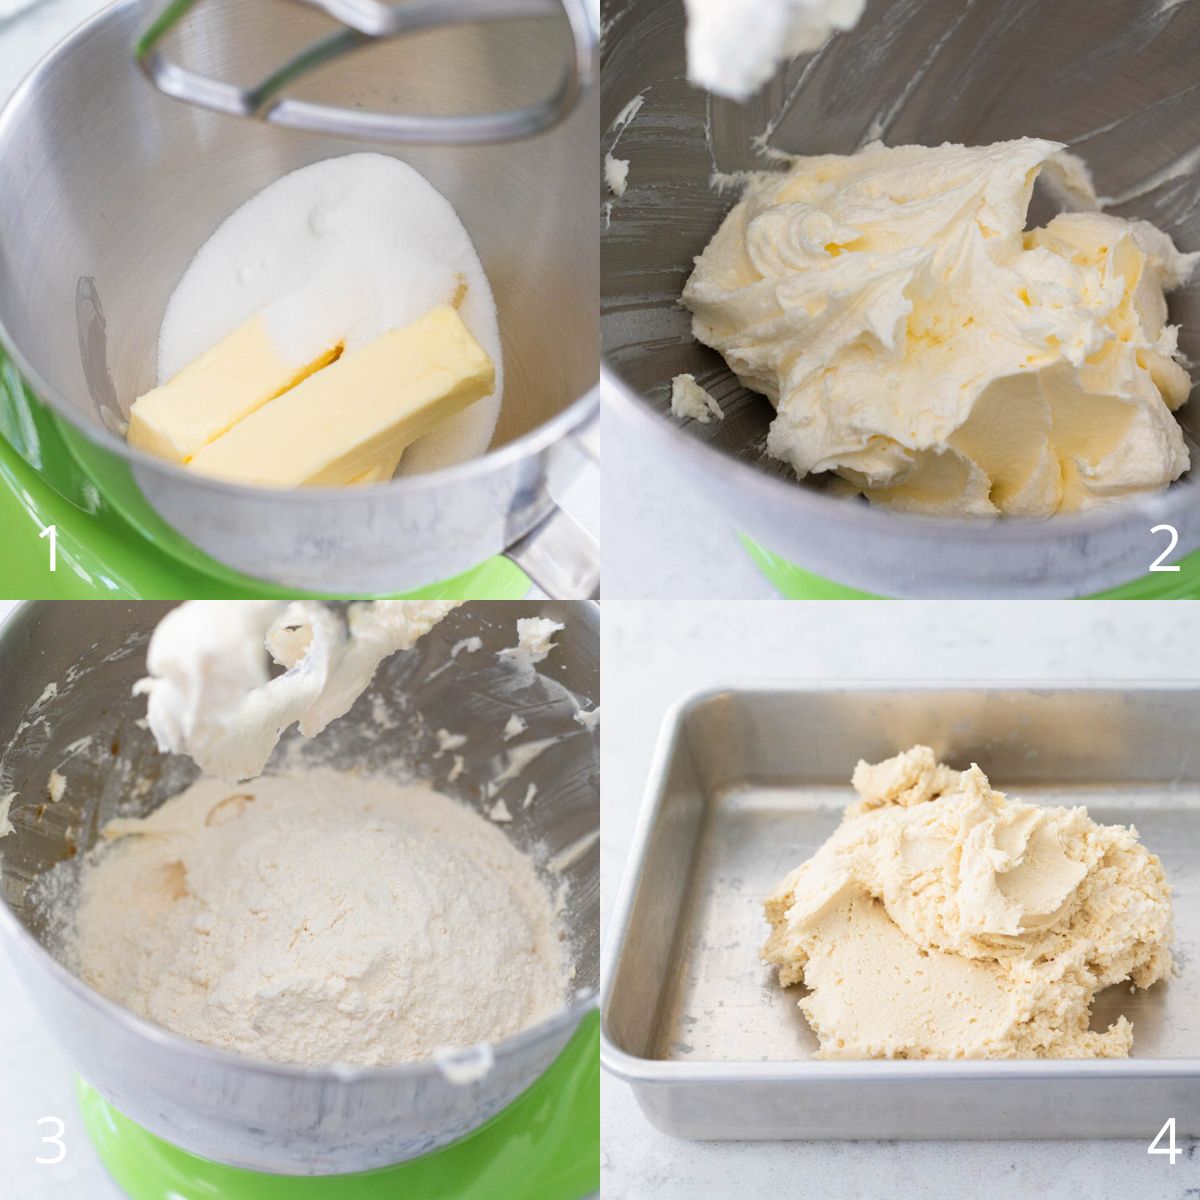 The step by step photos show how to prepare the shortbread cookie dough.